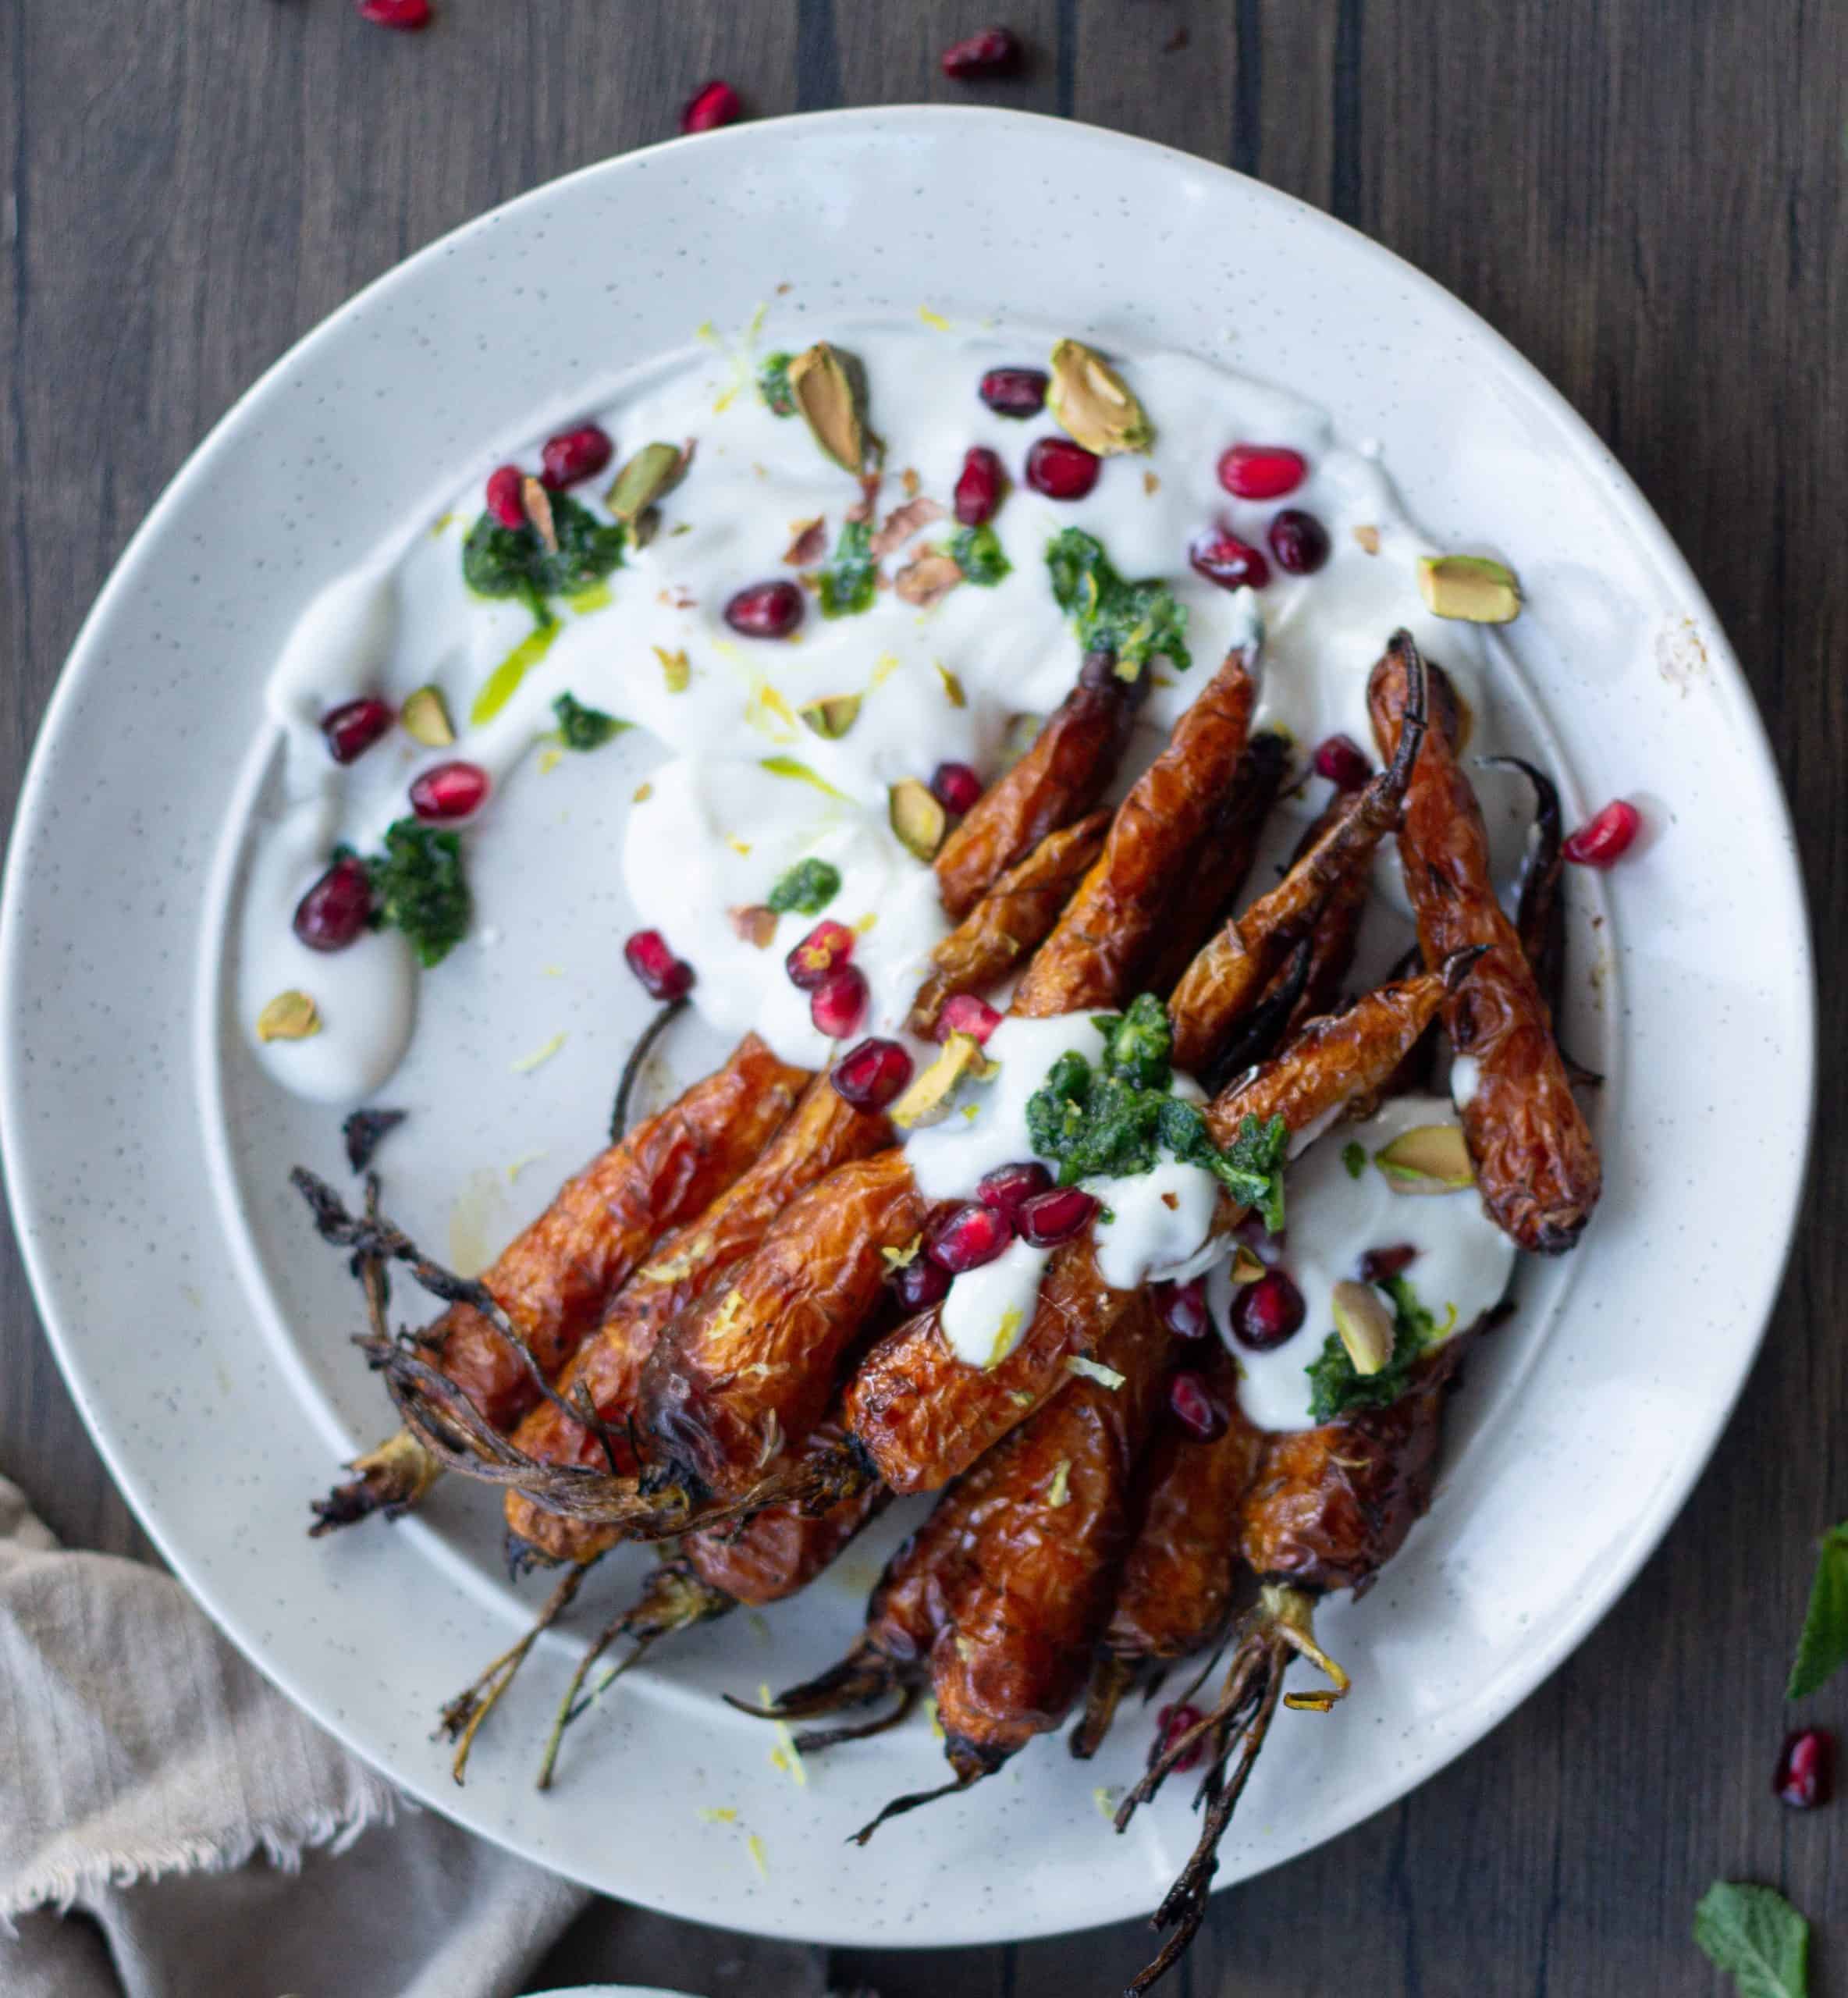 Labneh with carrots on a plate